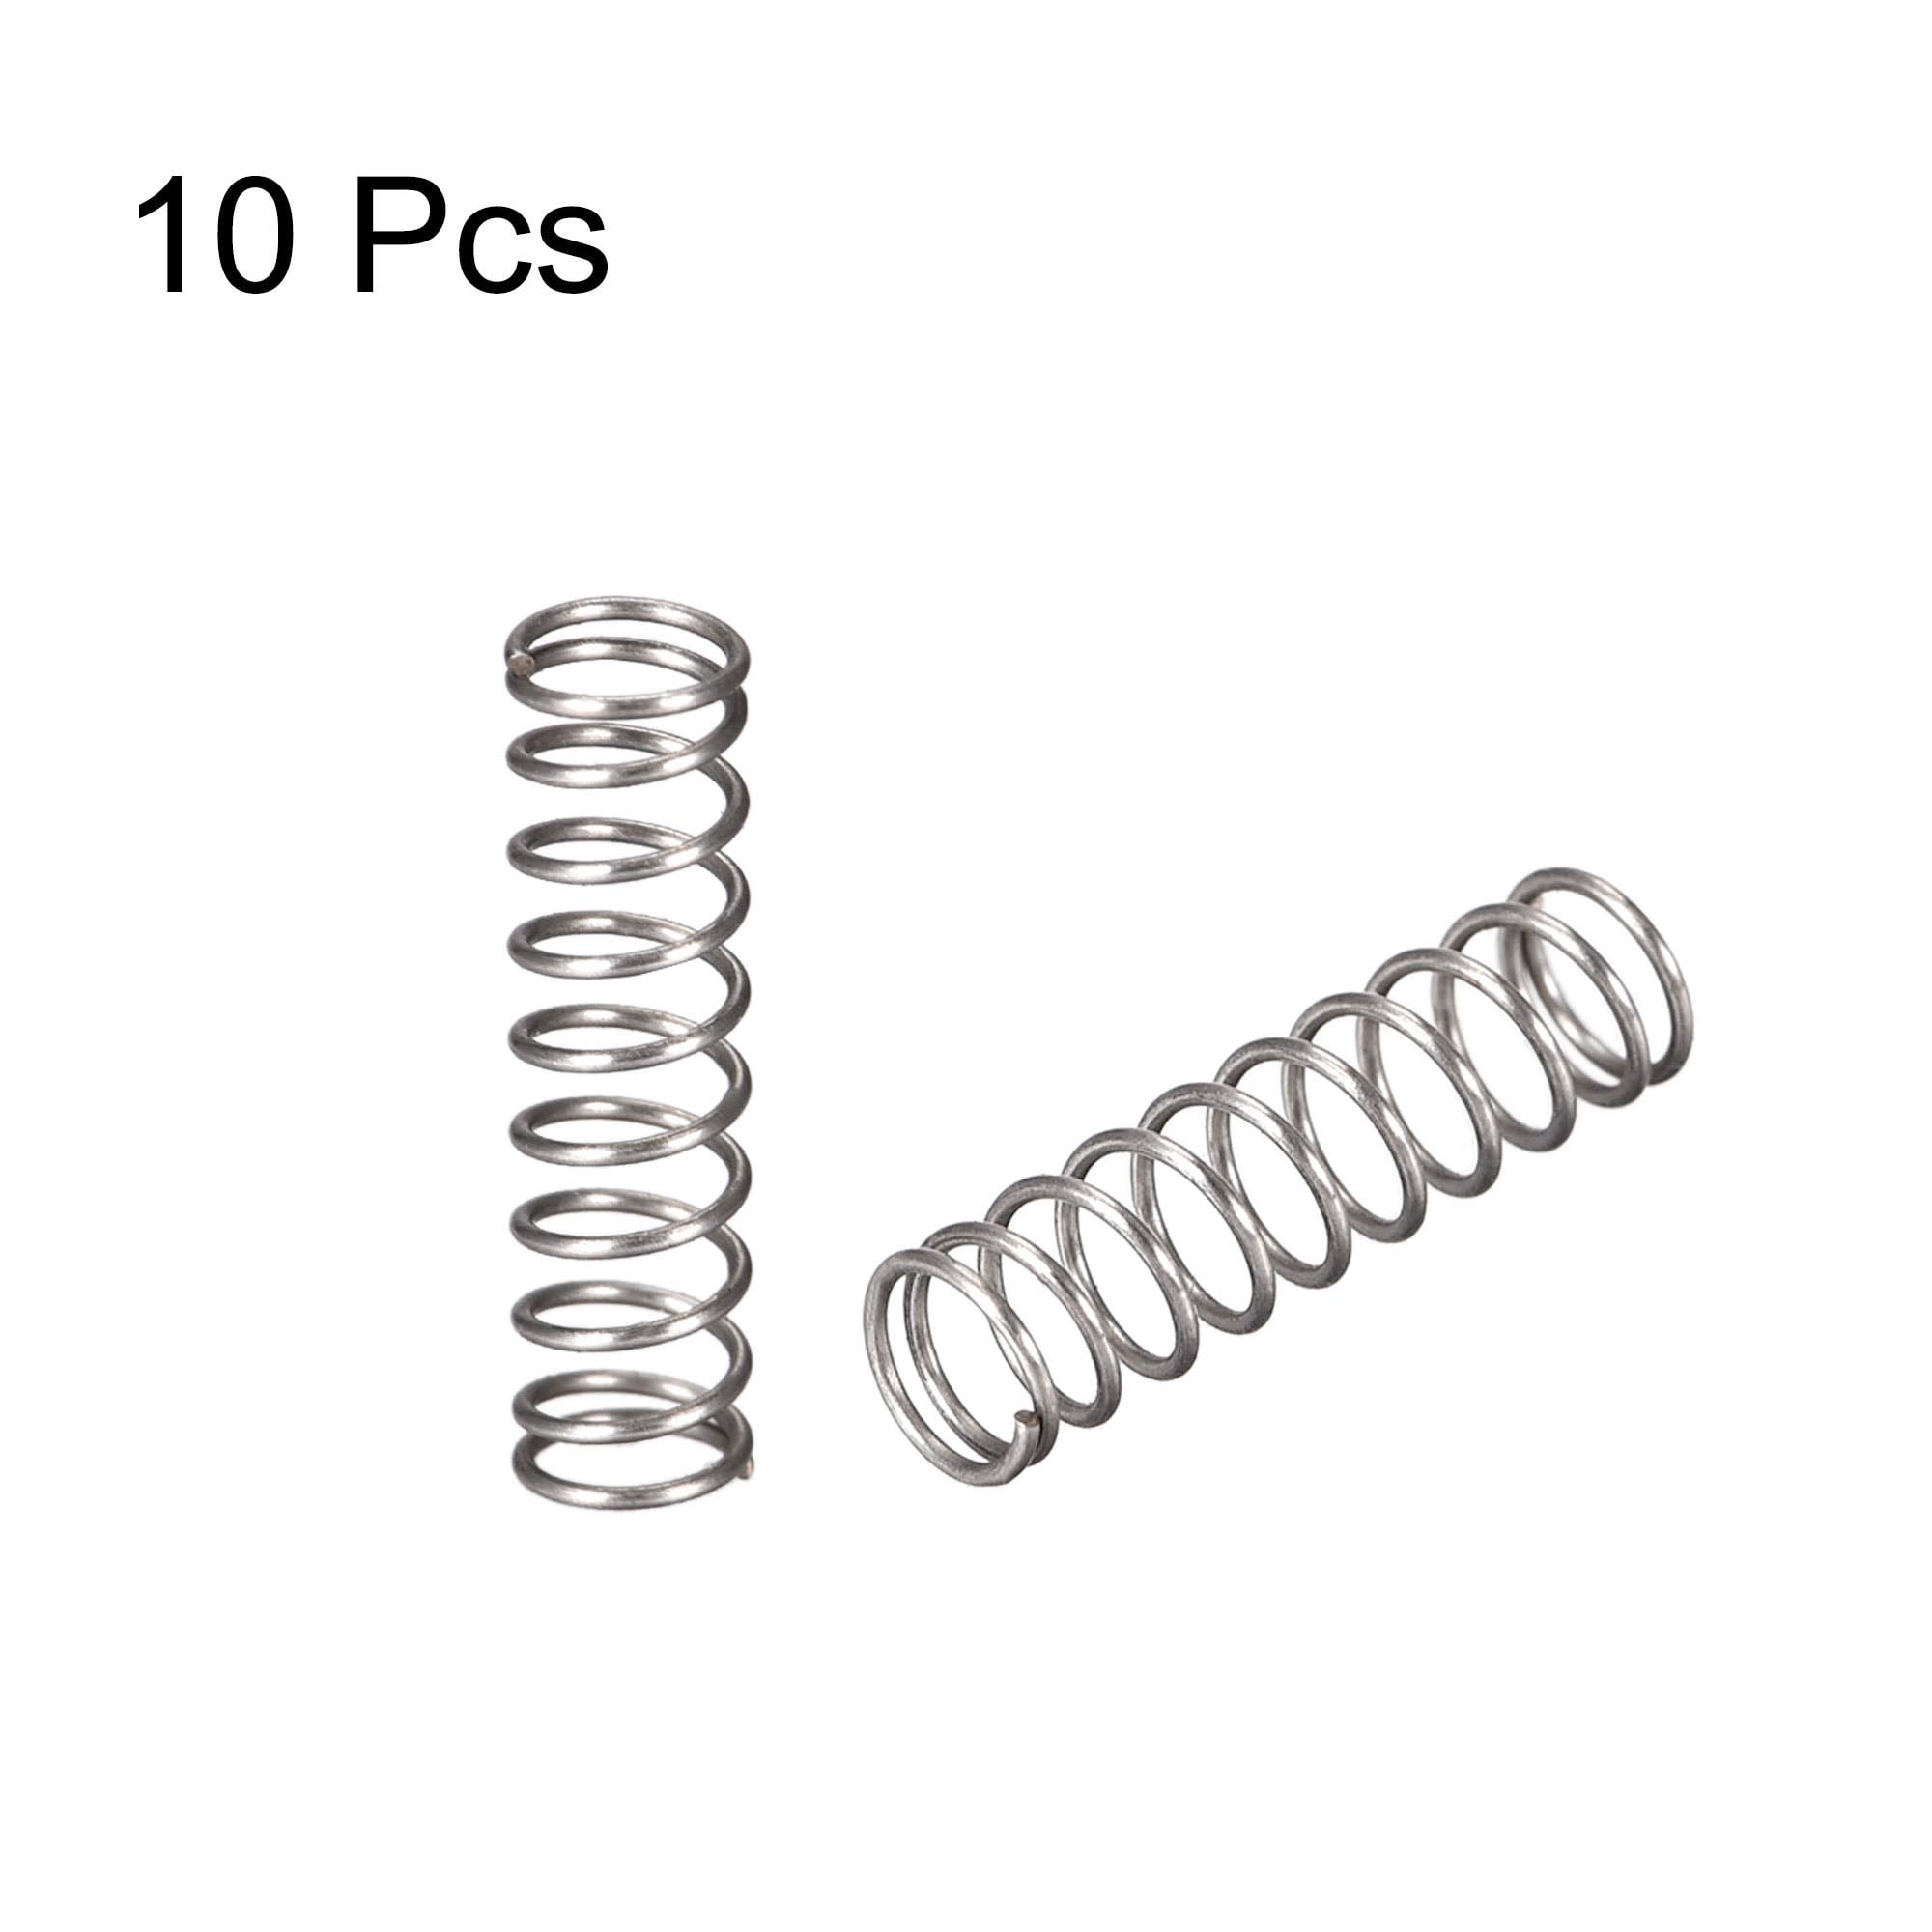 10Pcs 0.4mm Wire Diameter 3/4mm OD Stainless Steel Compression Pressure Spring 